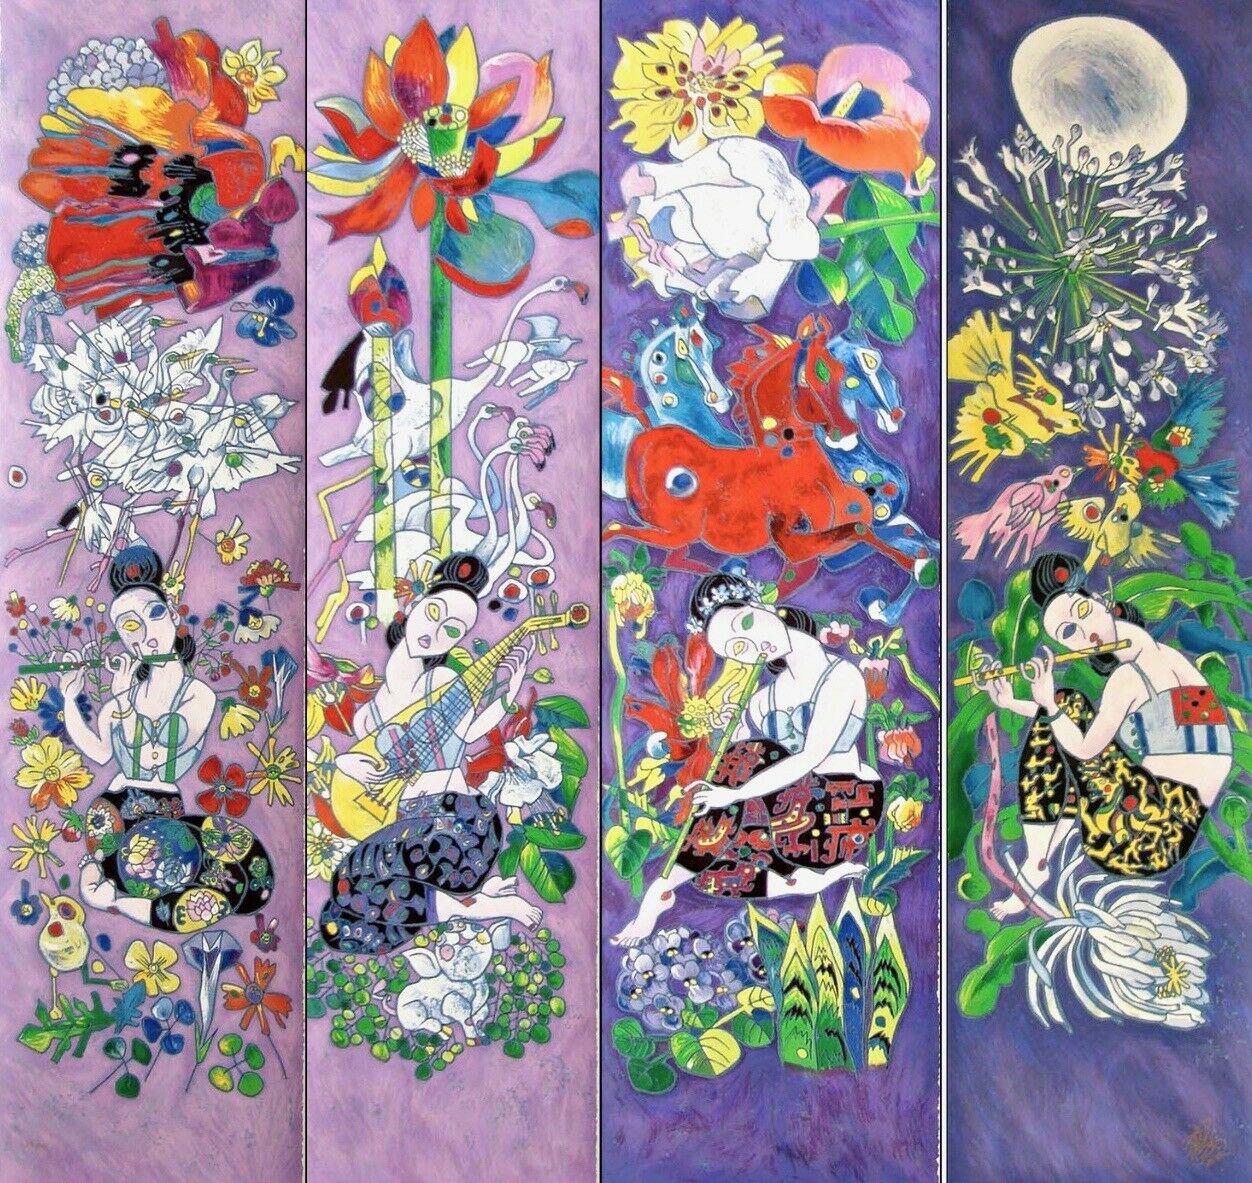 Jiang Tie Feng Animal Print - Four Songs of Spring, Limited Edition Silkscreen on Canvas, Jiang Tiefeng